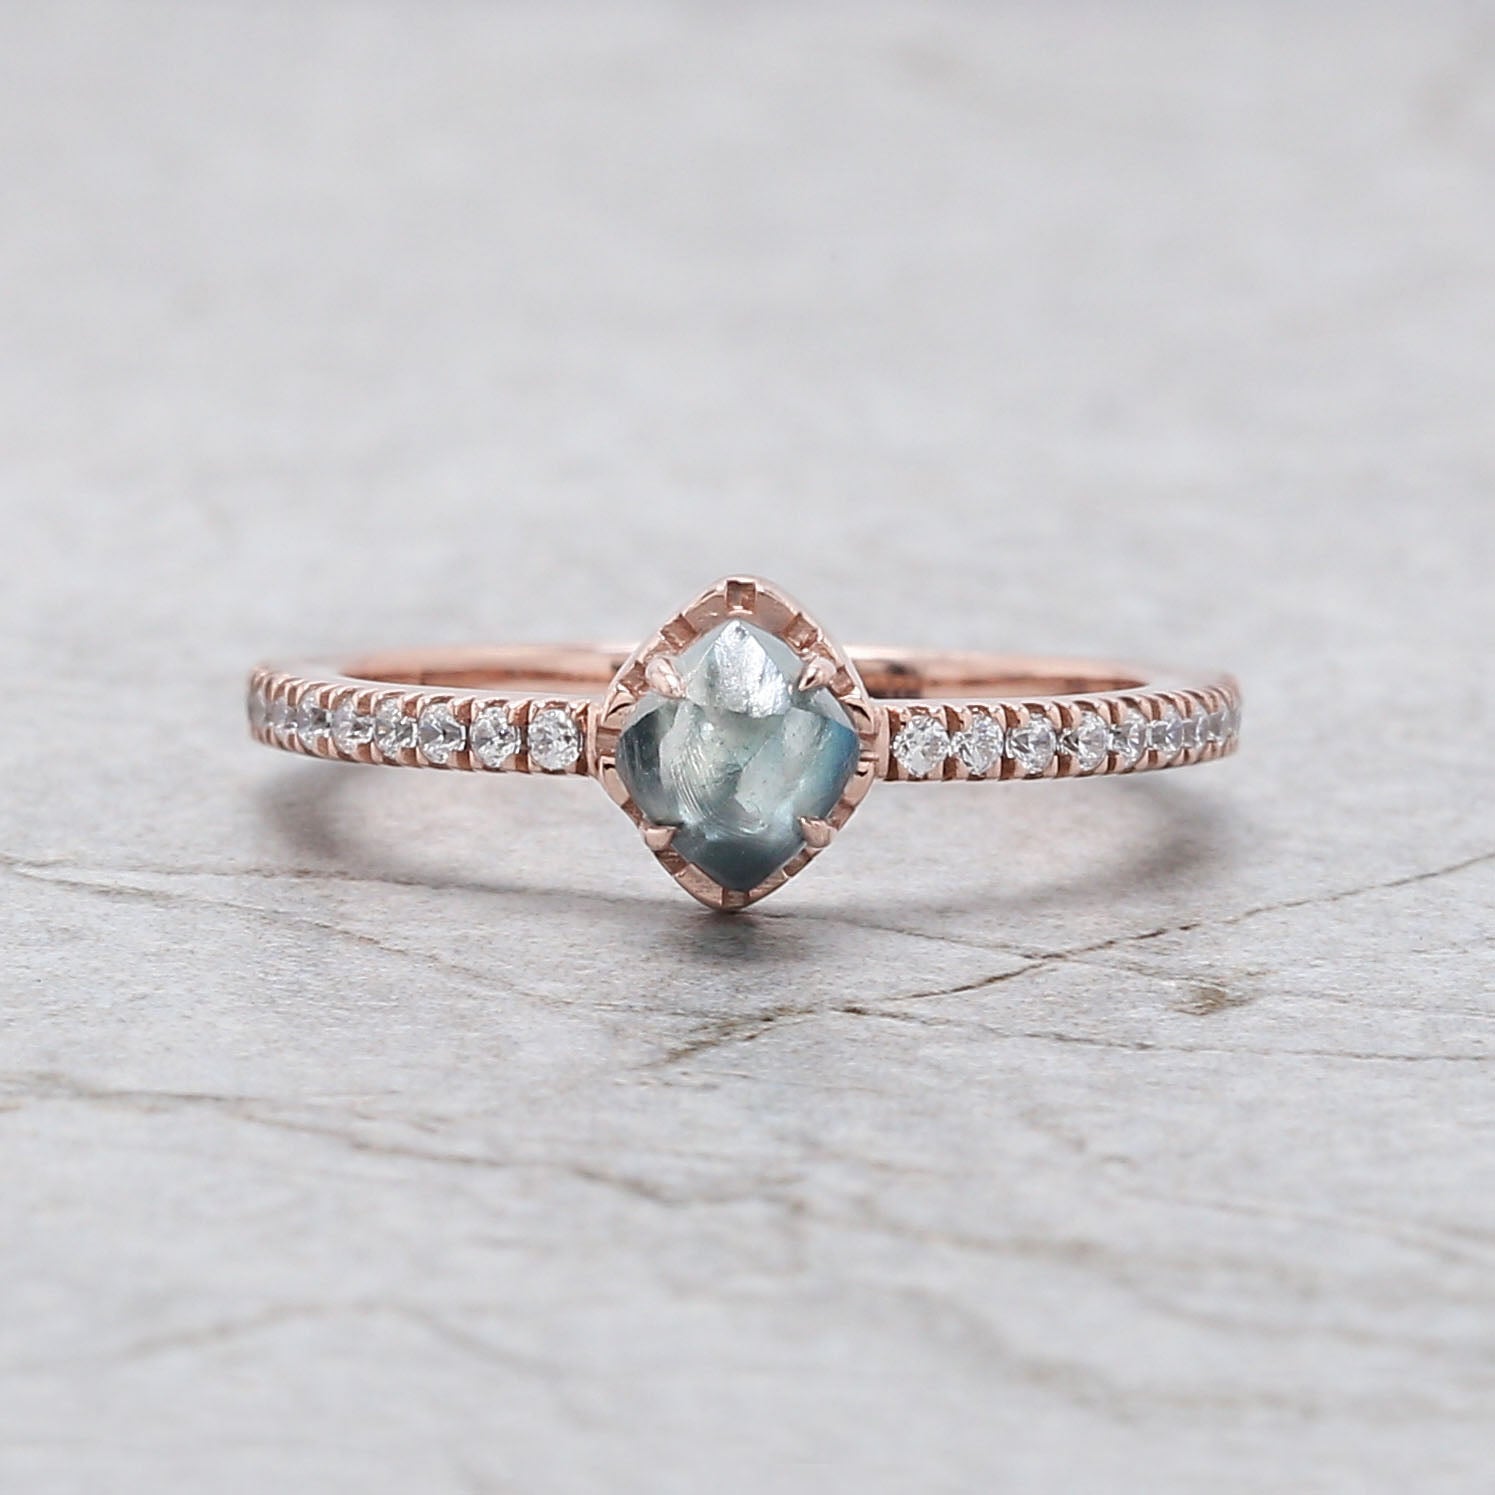 Rough Blue Color Diamond Ring 0.79 Ct 5.43 MM Crystal Rough Diamond Ring 14K Solid Rose Gold Silver Engagement Ring Gift For Her QL2225